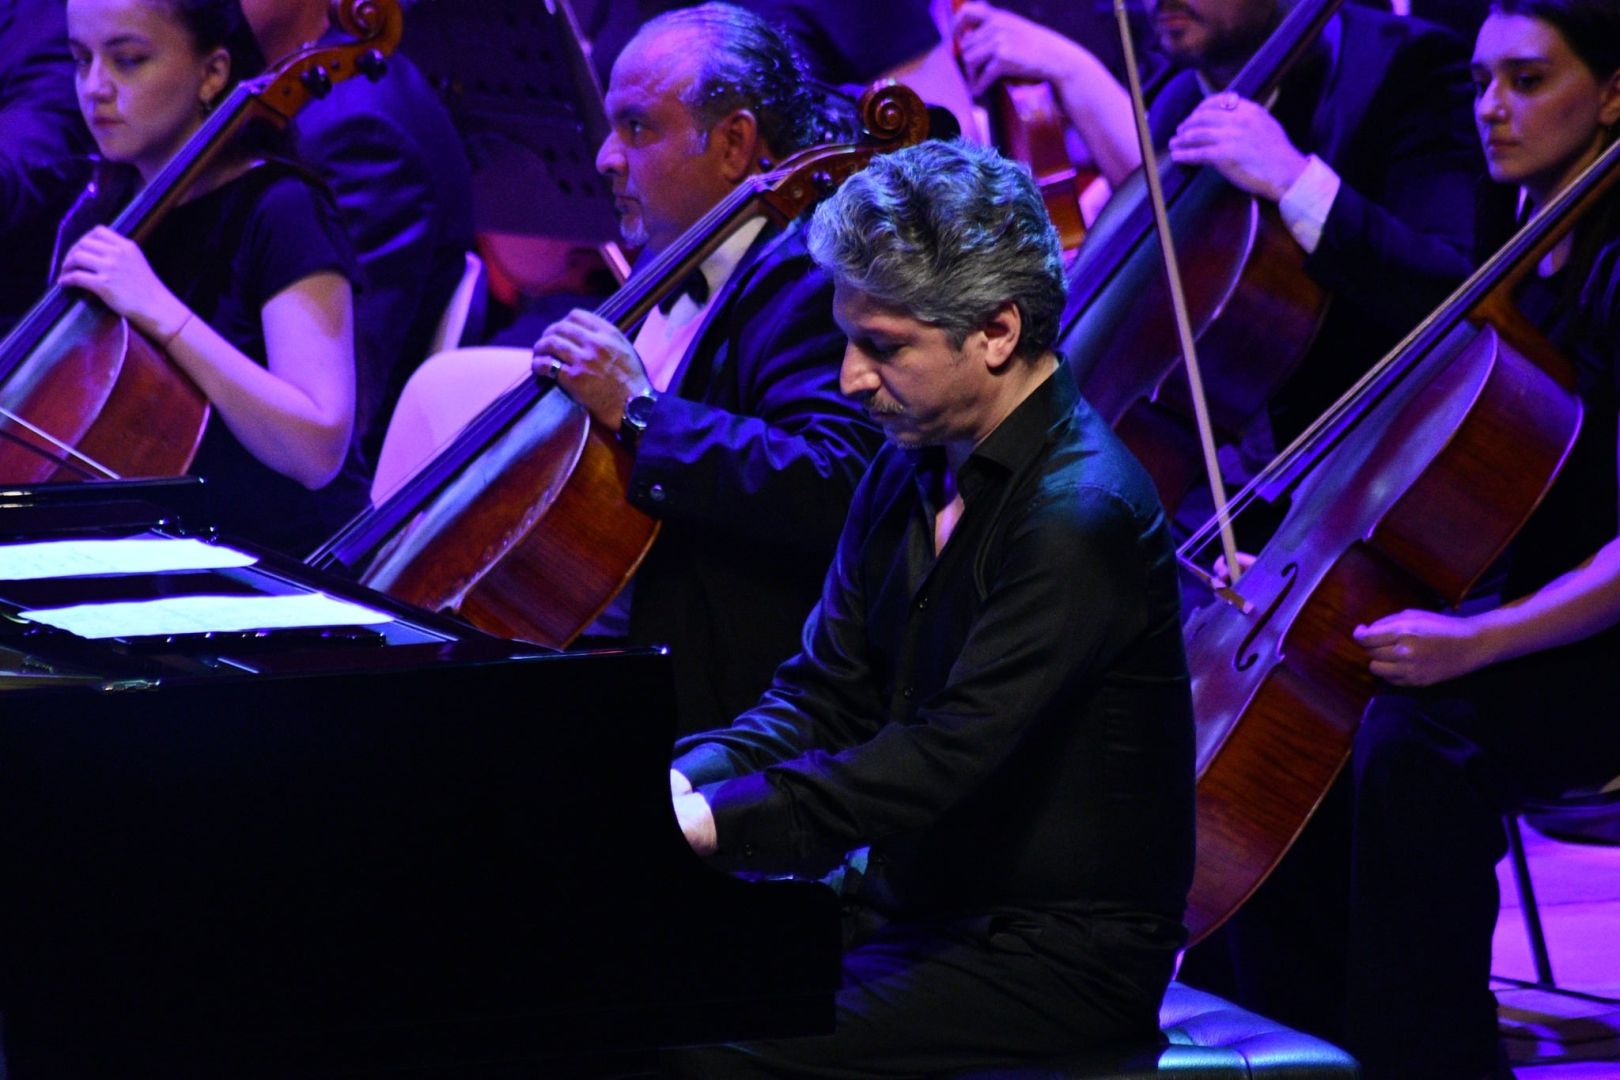 Shahin Novrasli's concert to be broadcasted on Medici.TV [PHOTOS]